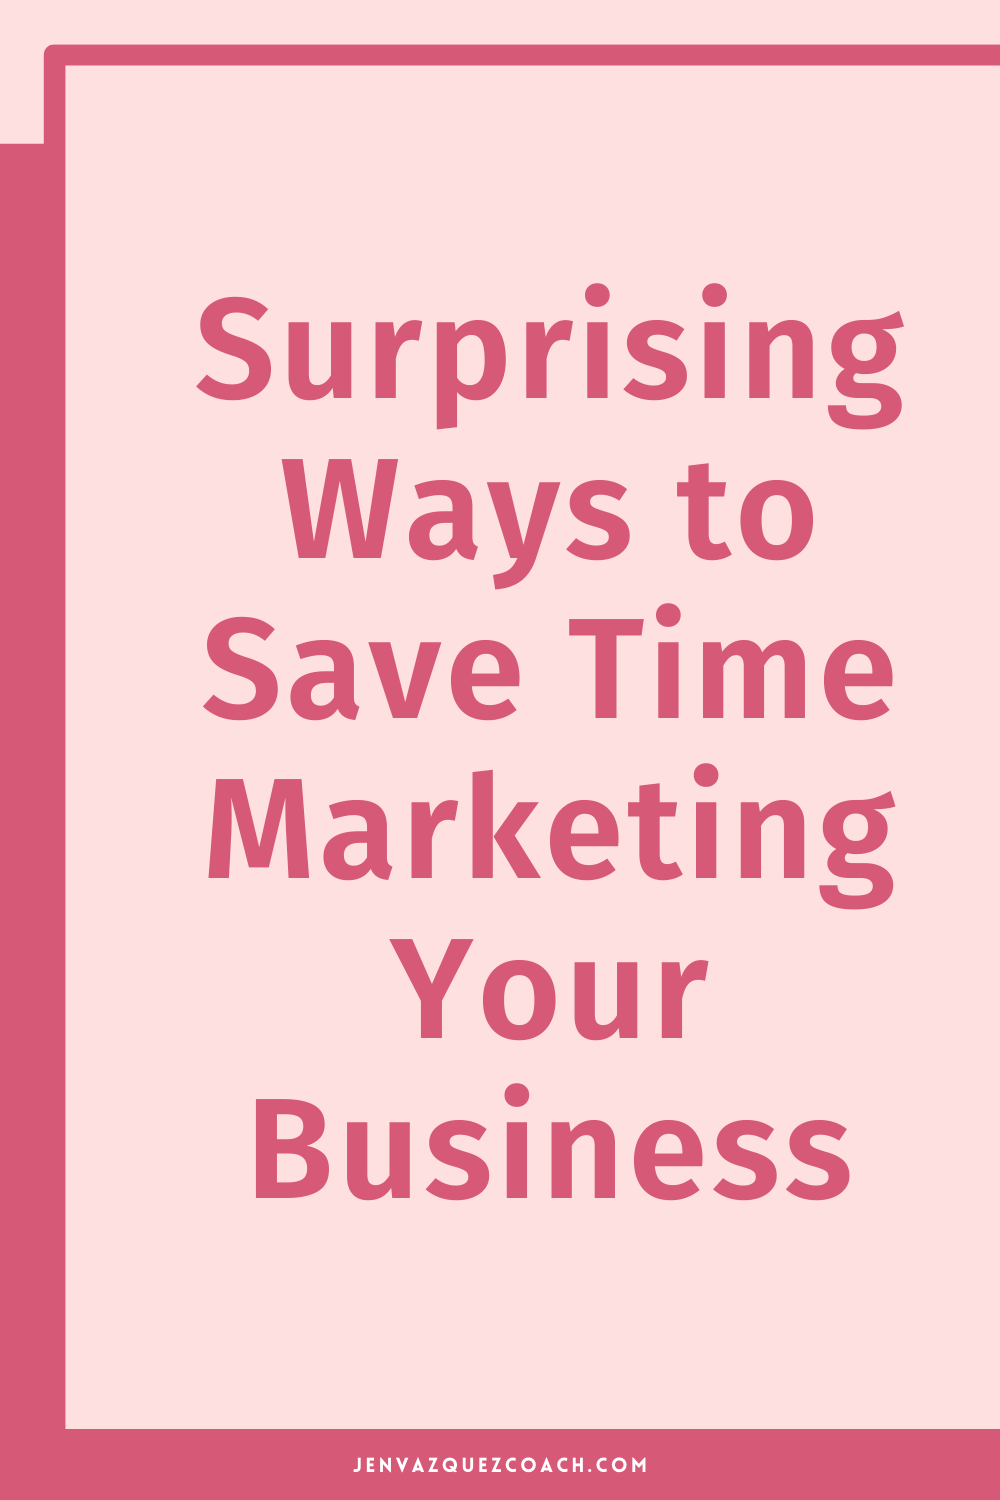 Surprising Ways to Save Time Marketing Your Business by Jen Vazquez Media